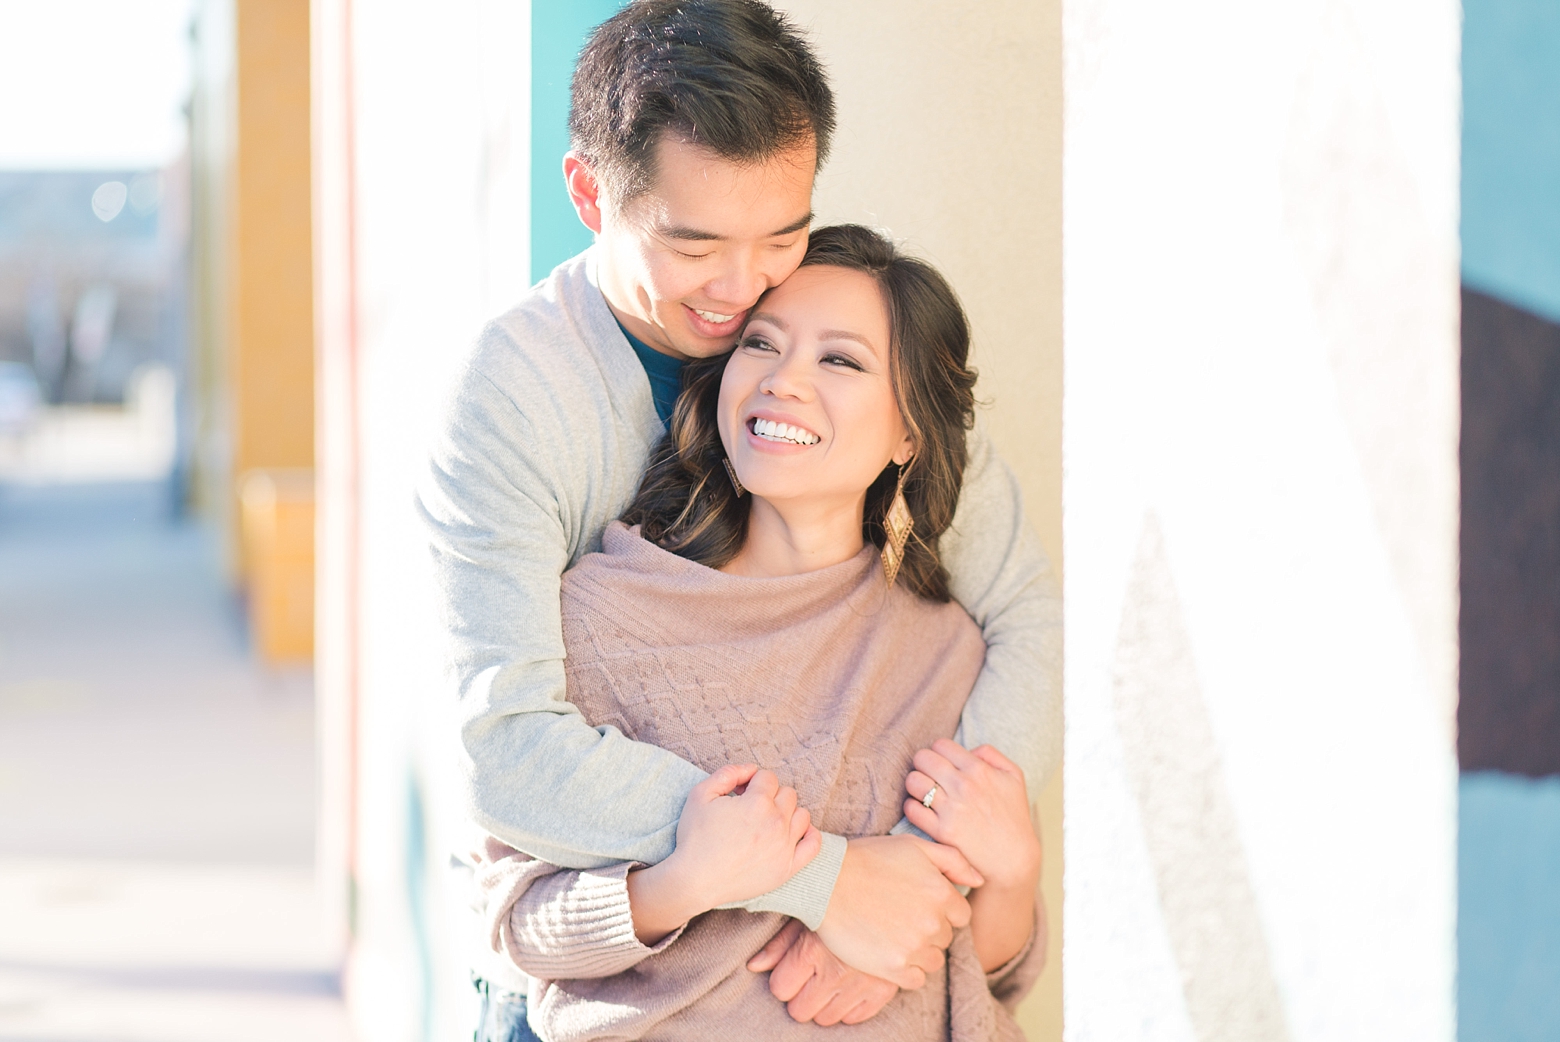 7 tips for a successful engagement session by Angie McPherson Photography